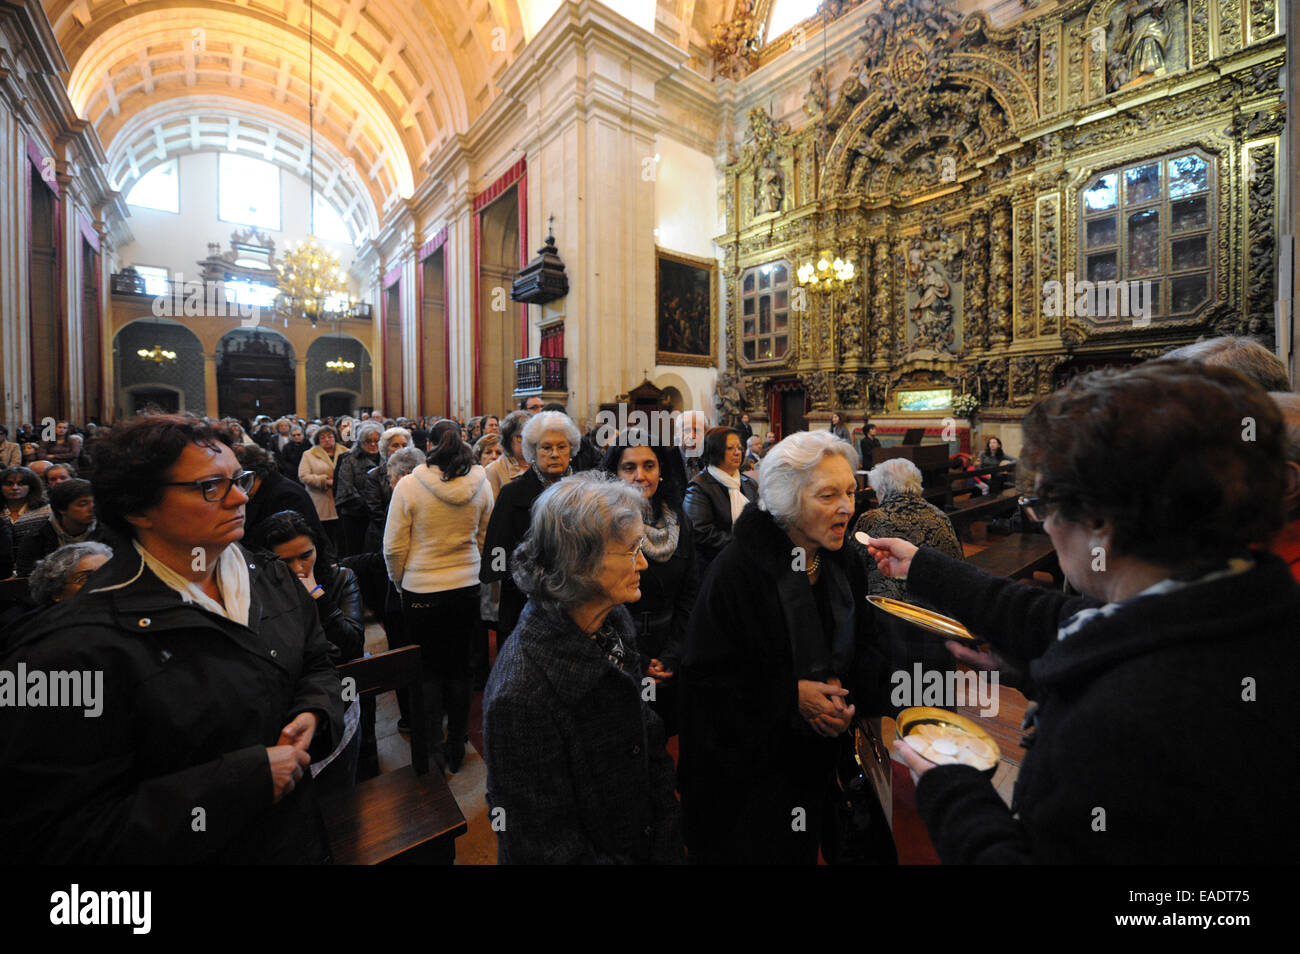 Communion during Catholic mass at the Sé Nova cathedral in Coimbra, Portugal, Europe Stock Photo